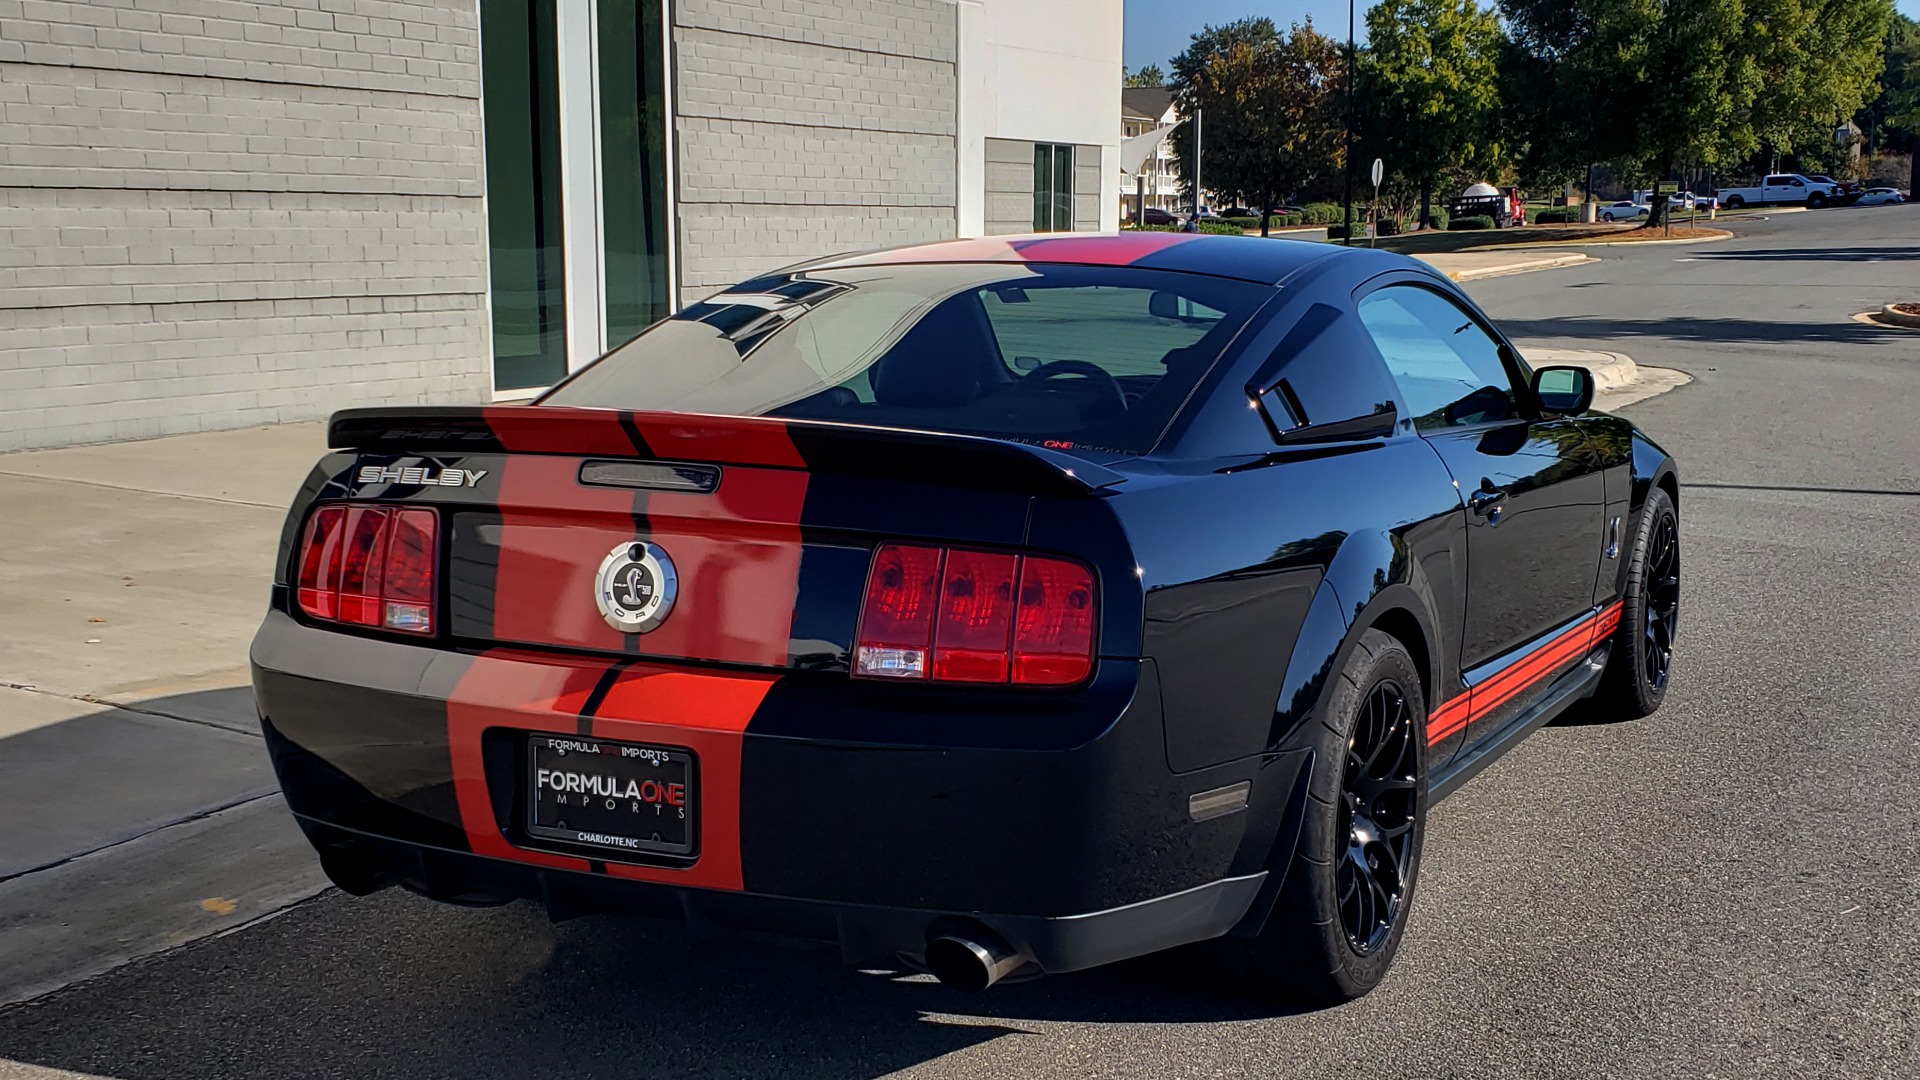 Used 2009 Ford MUSTANG SHELBY GT500 / RED SNAKE EDITION / UPGRADED 750RWHP / NAV / SHAKER SND for sale Sold at Formula Imports in Charlotte NC 28227 9